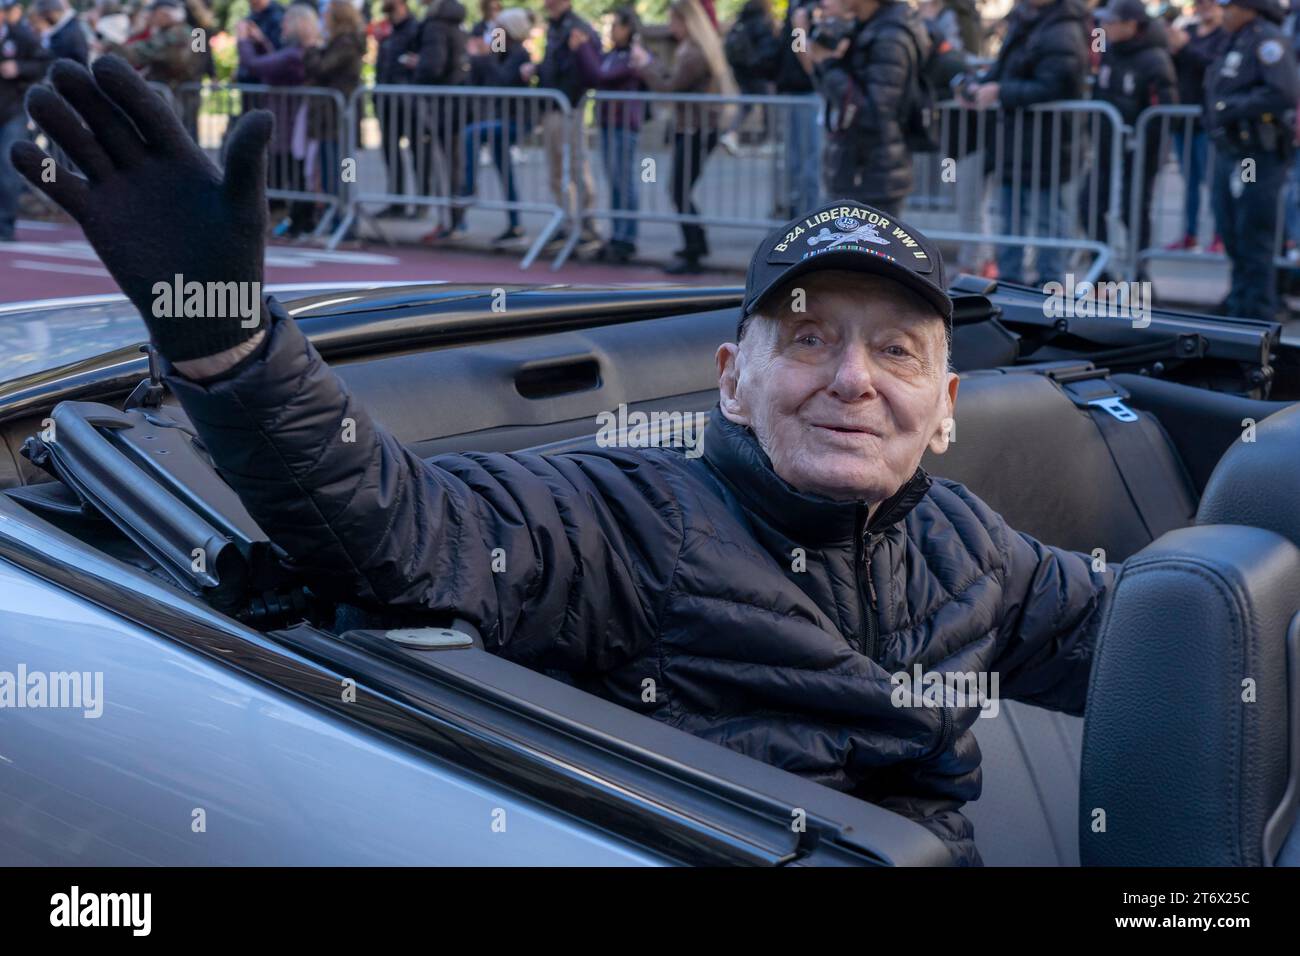 NEW YORK, NEW YORK - NOVEMBER 11: SSG Walter Rybarczik, 102 Years old WWII U.S. Army Air Corp B-24 Liberator aviator, participates in the annual Veterans Day Parade on November 11, 2023 in New York City. Hundreds of people lined 5th Avenue to watch the biggest Veterans Day parade in the United States. This years event included veterans, active soldiers, police officers, firefighters and dozens of school groups participating in the parade which honors the men and women who have served and sacrificed for the country. Stock Photo